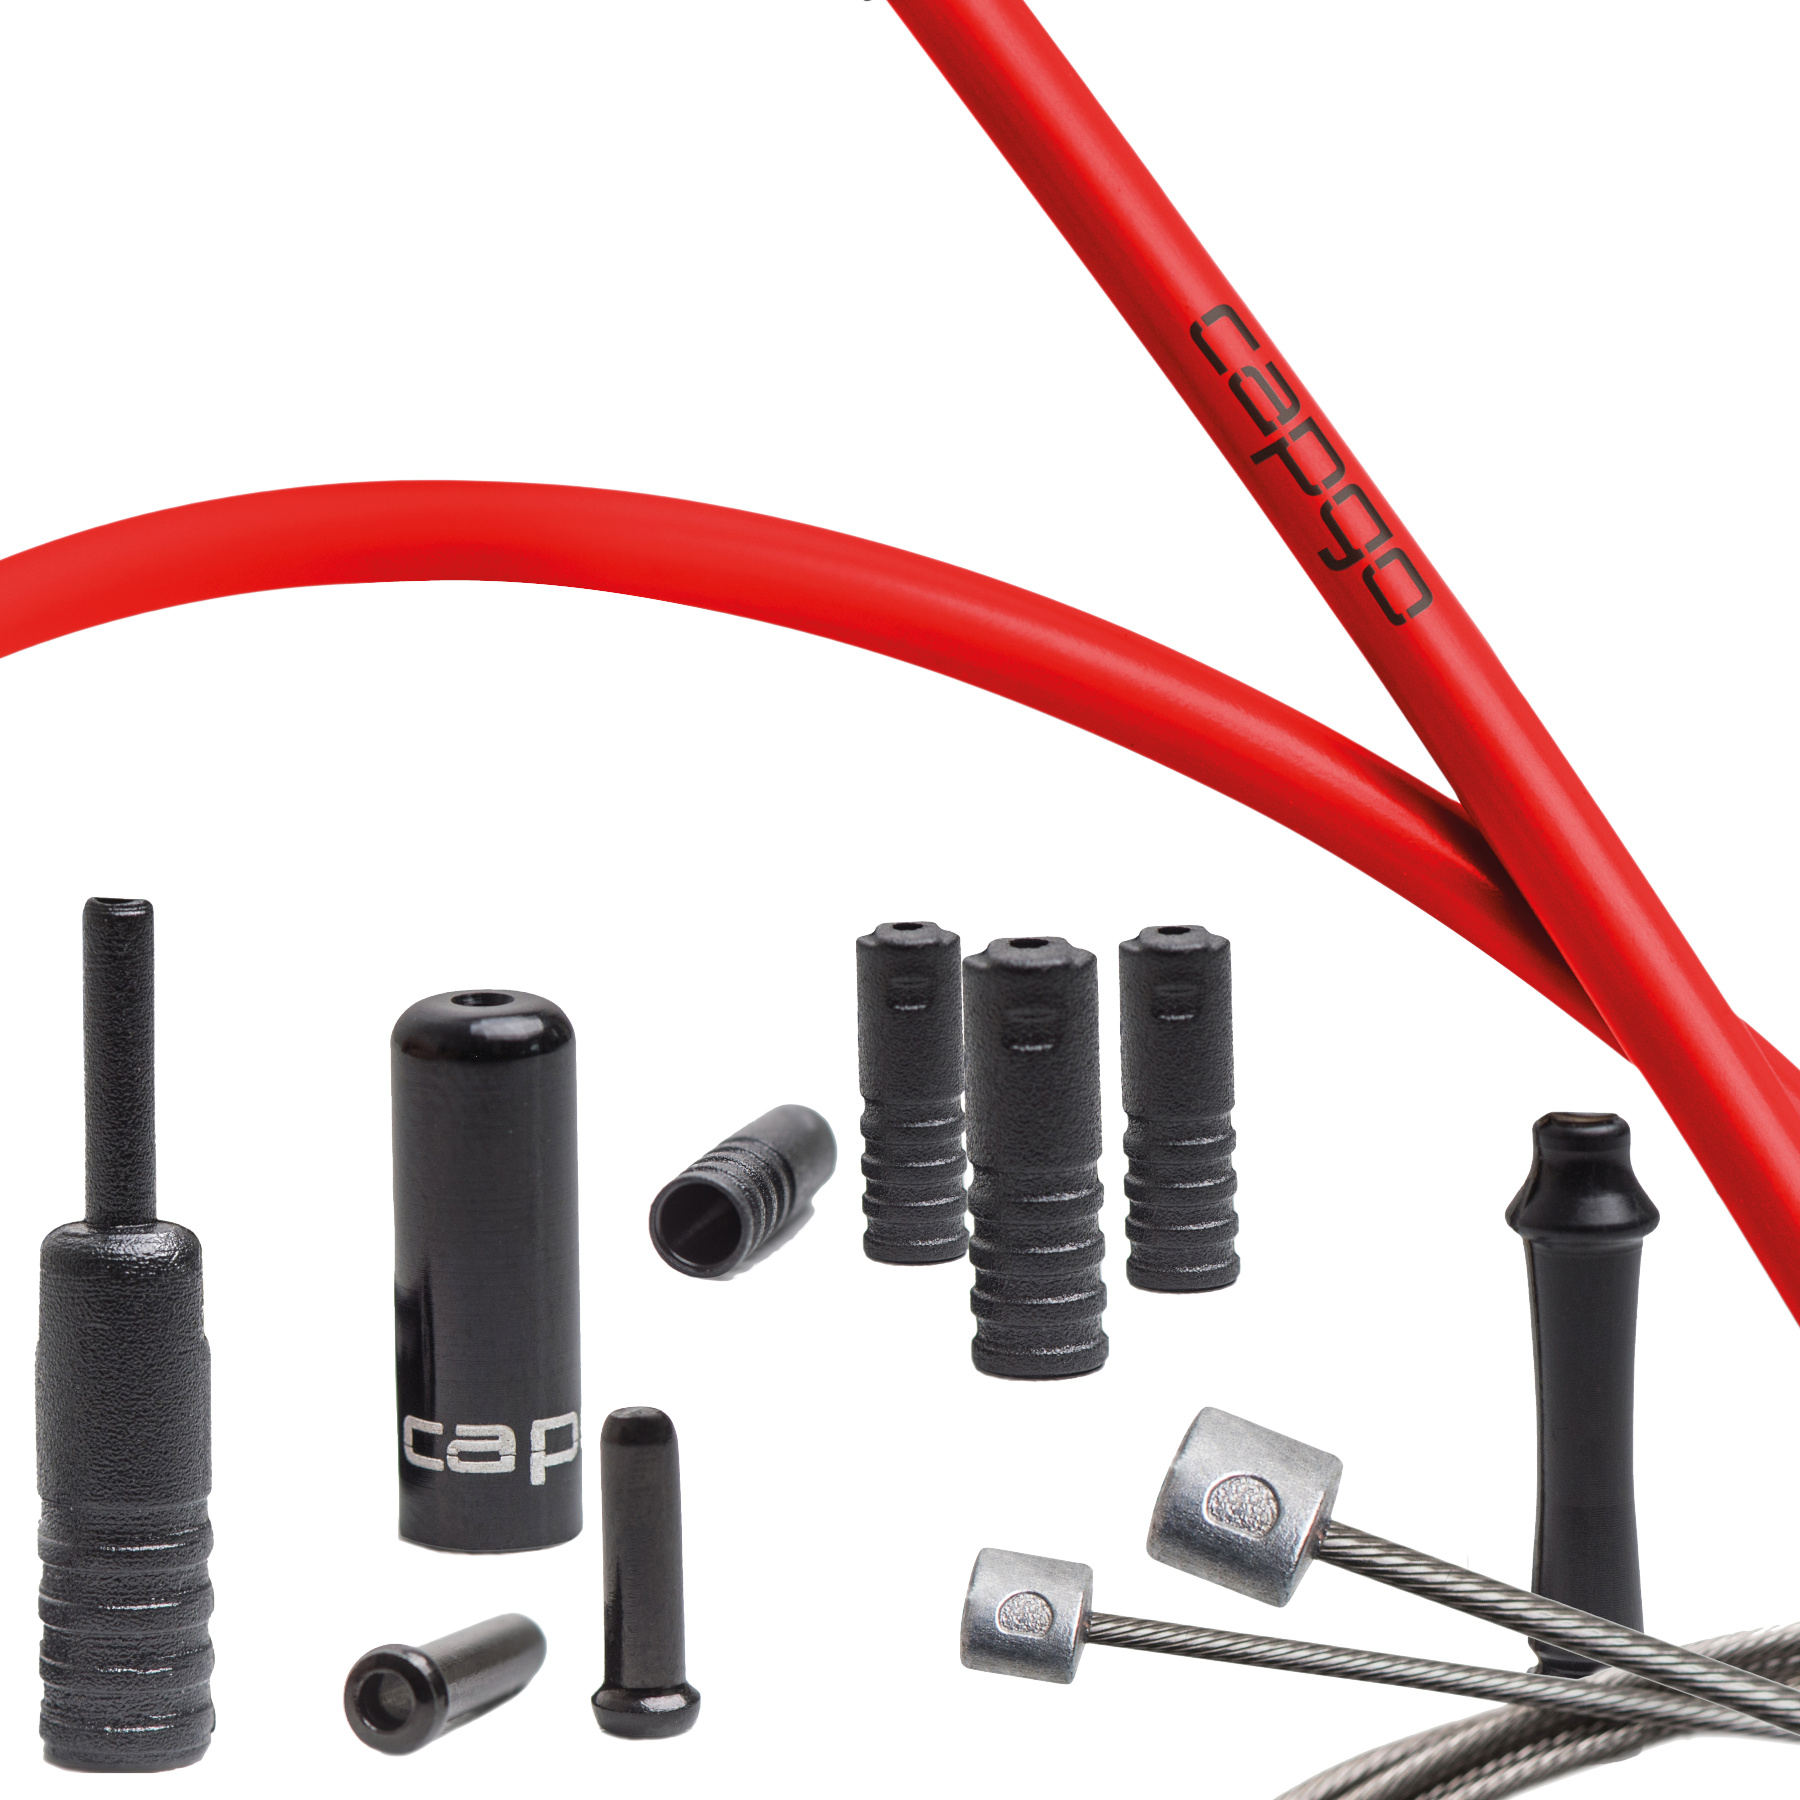 Productfoto van capgo Blue Line Shift Cable Set - Stainless Steel - PTFE - Shimano/SRAM - red